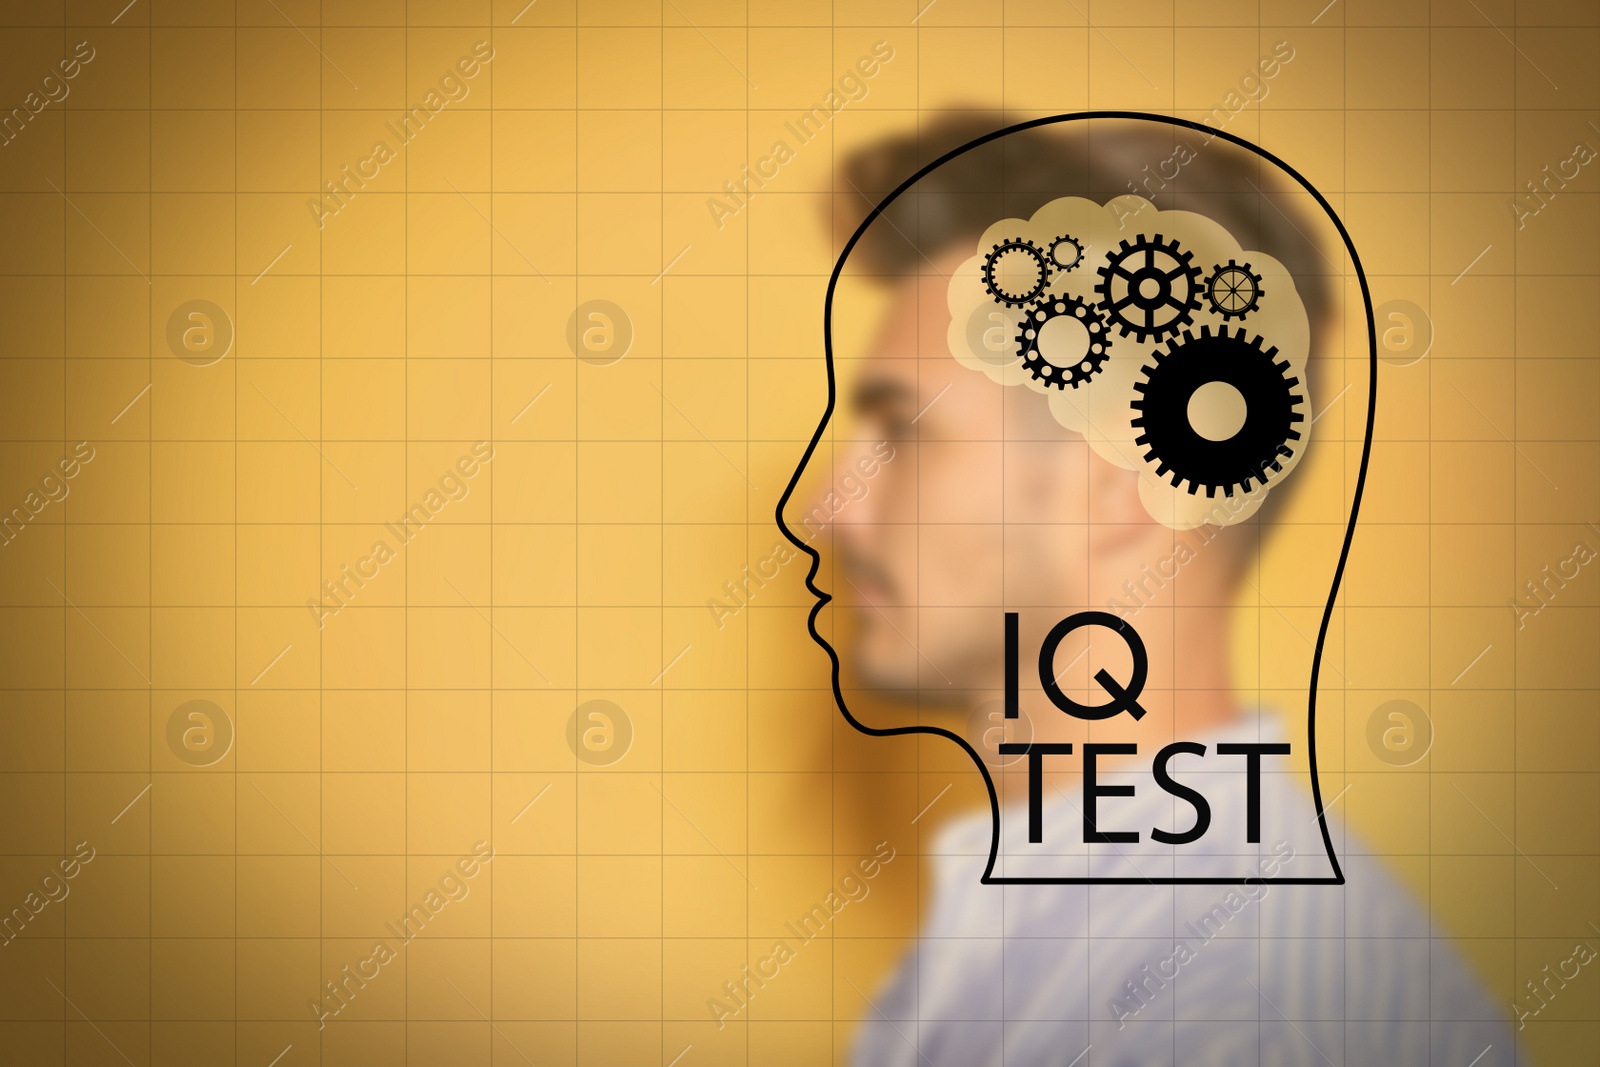 Image of Illustrated head with brain and blurred view of man on yellow background. IQ test